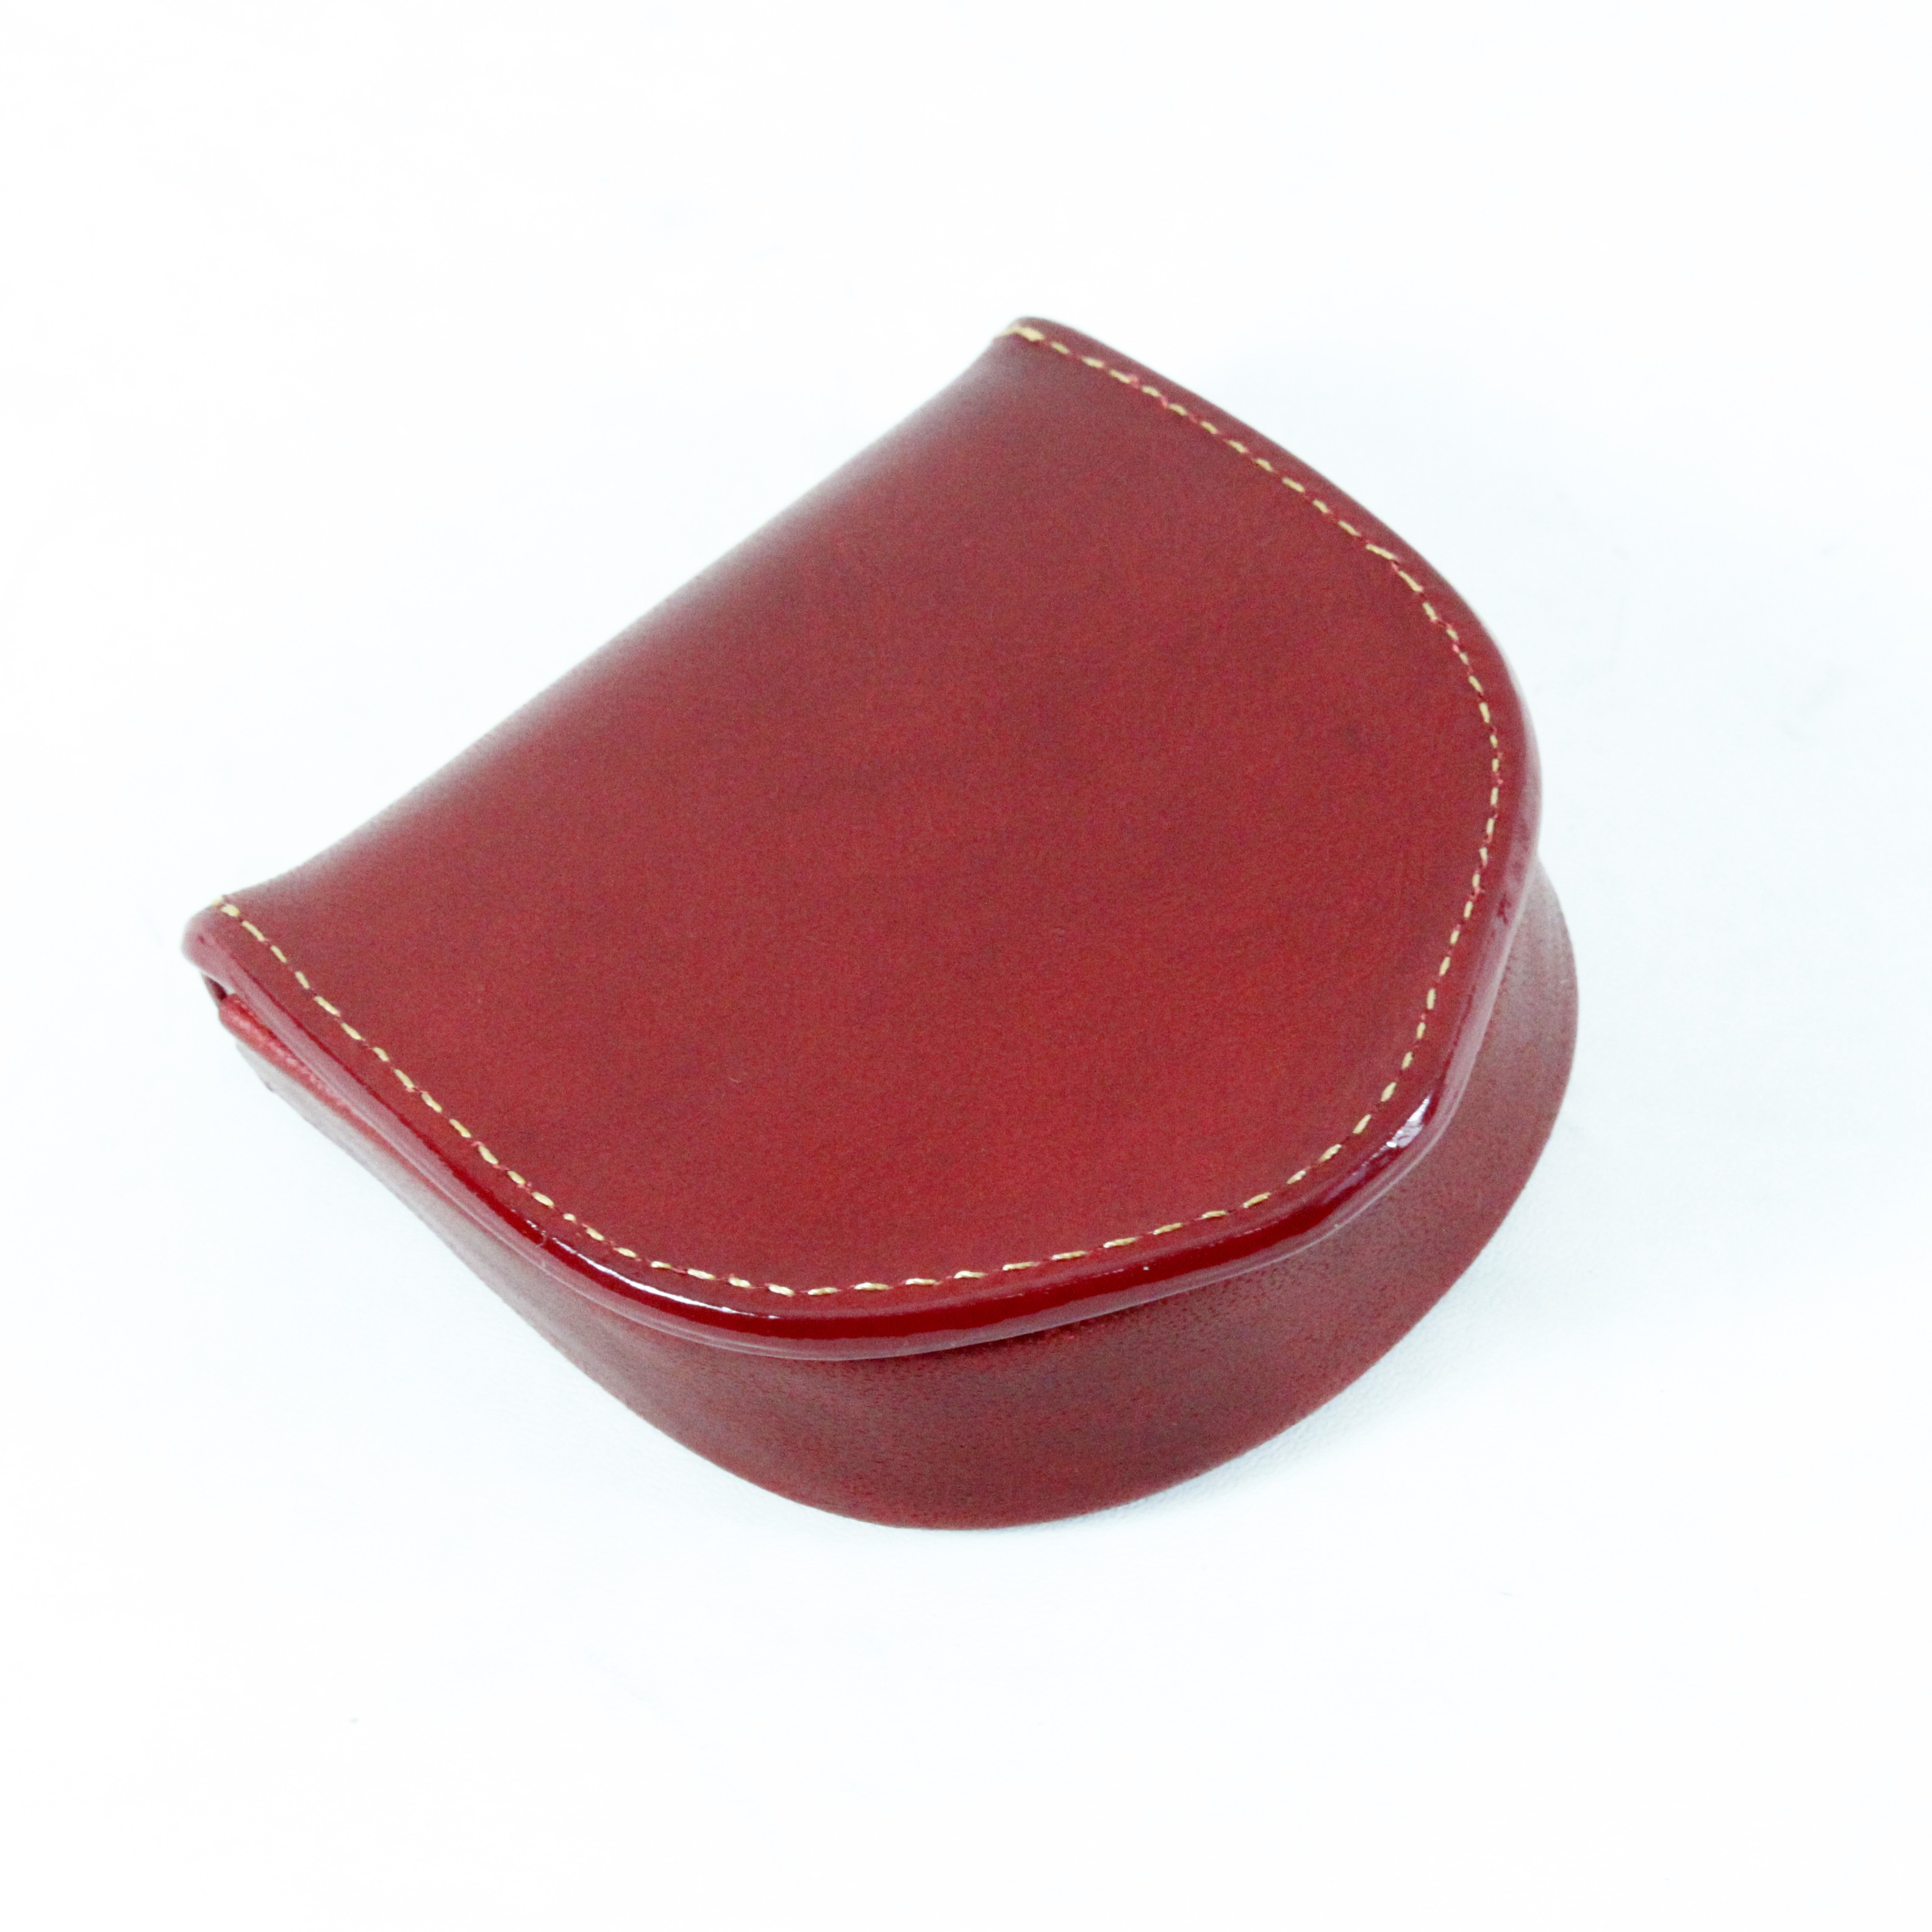 Buy POPUCT Cotton Buckle Coin Purse Classic Exquisite Wallet for Women, Red/sakura,  at Amazon.in